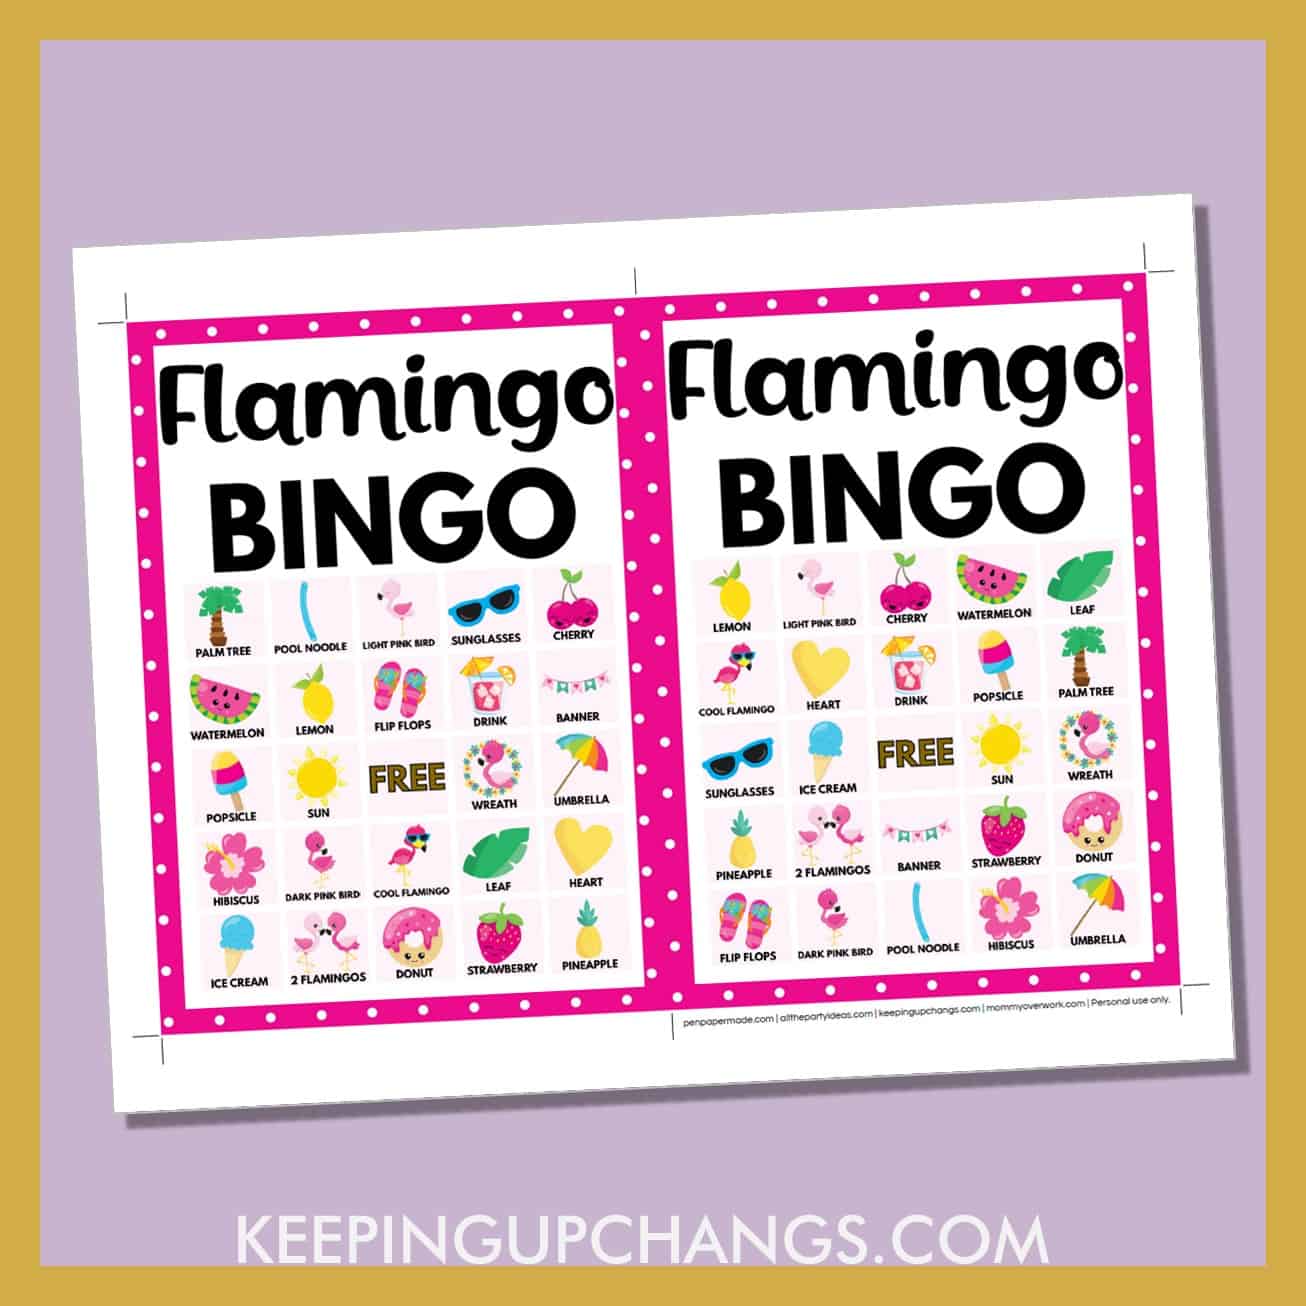 free flamingo bingo card 5x5 5x7 game boards with images and text words.